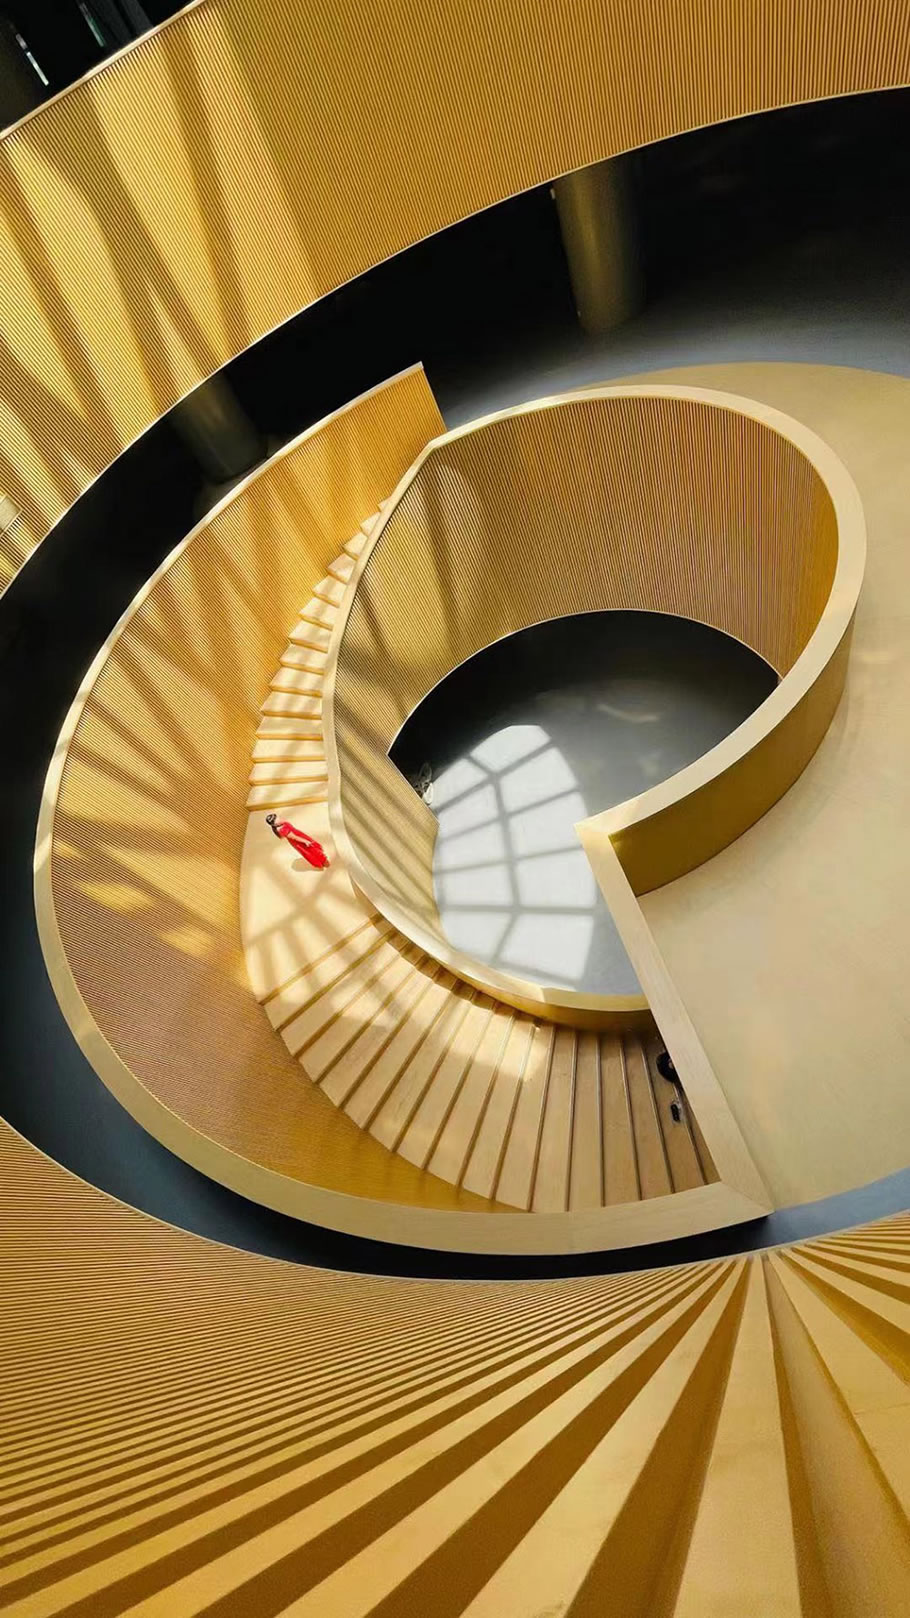 13_Spiral staircase中庭旋转楼梯_P_Huang Xiaoting 黄晓婷.jpg